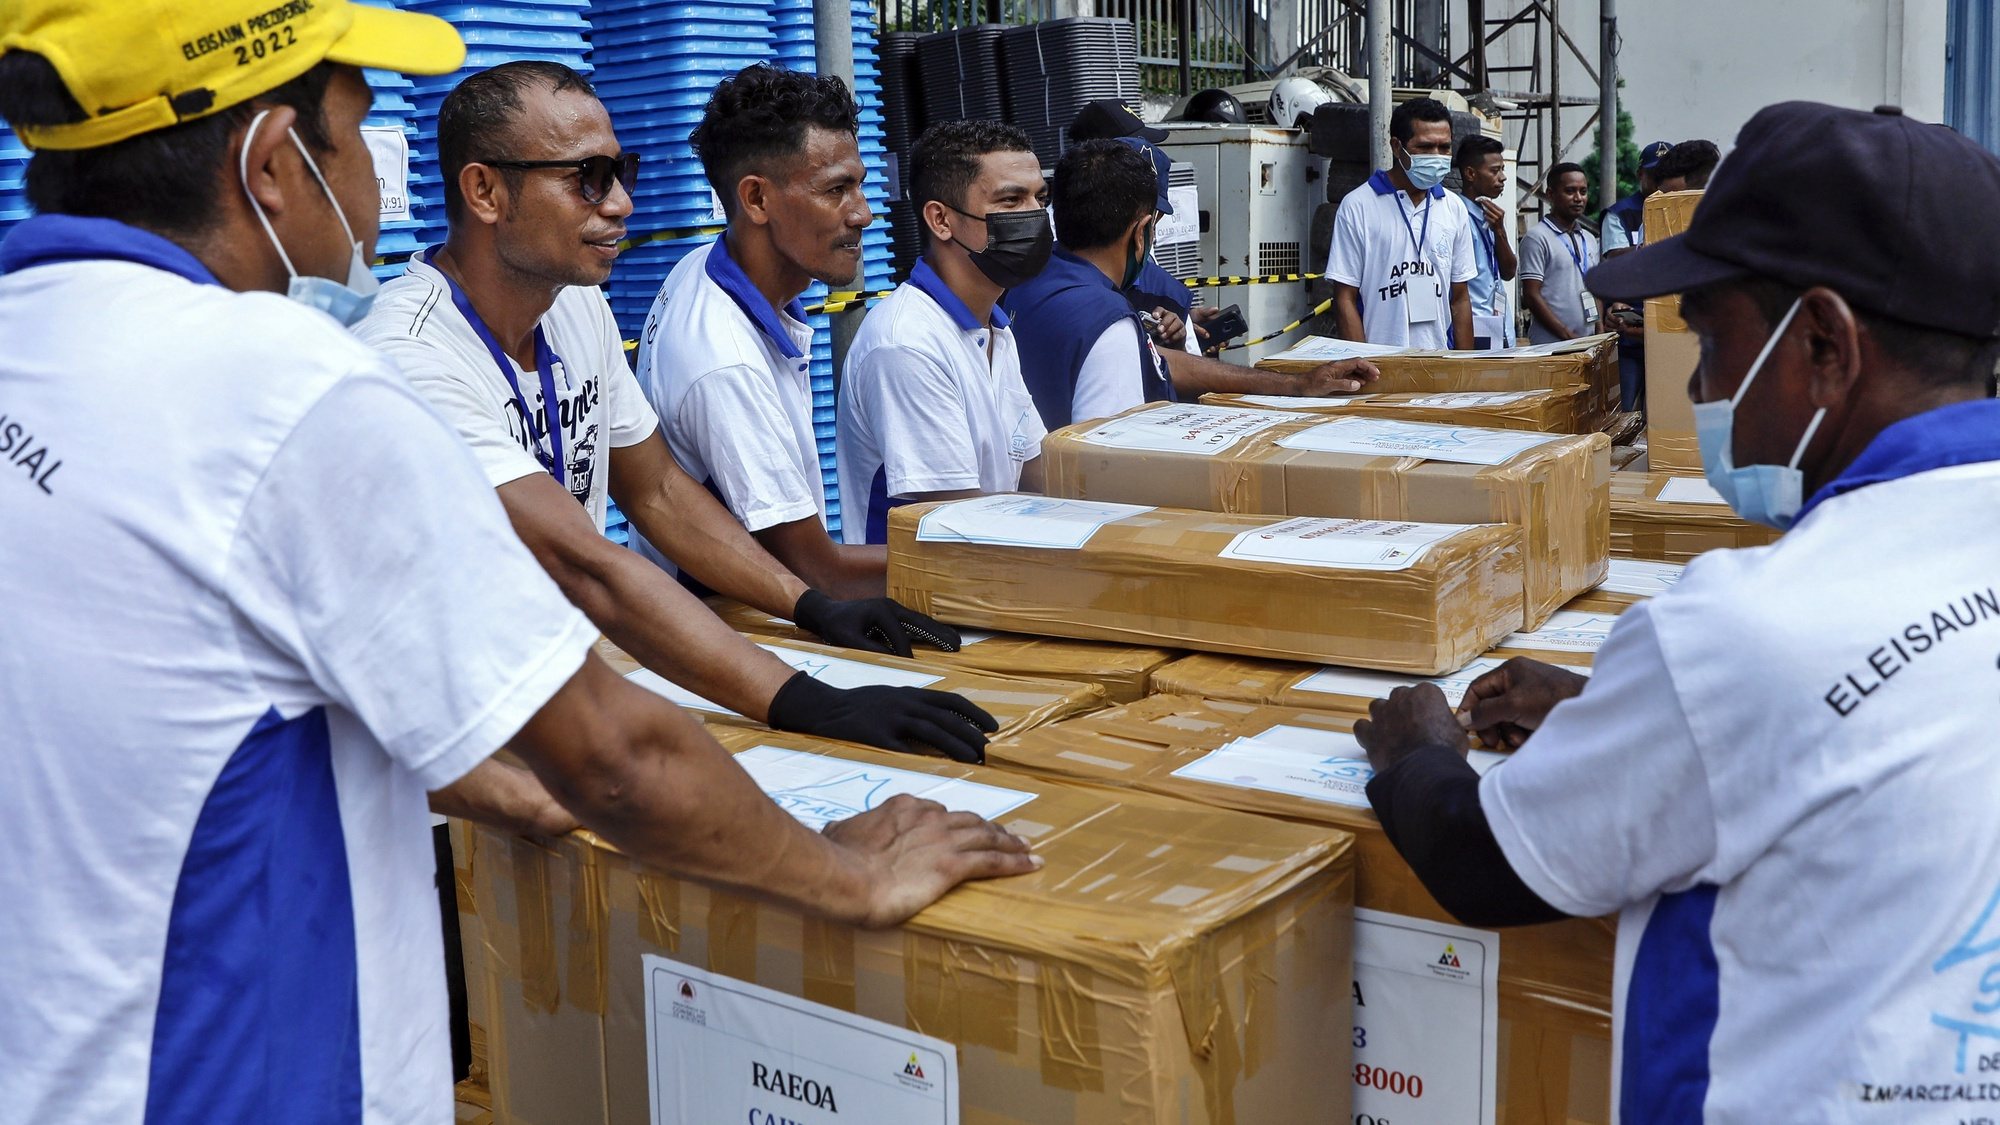 epa09816596 Workers stand next to boxes of election logistics to be transported to the various districts, in Dili, East Timor, also known as Timor Leste, 11 March 2022. The country will hold its presidential election on 19 March 2022.  EPA/ANTONIO DASIPARU